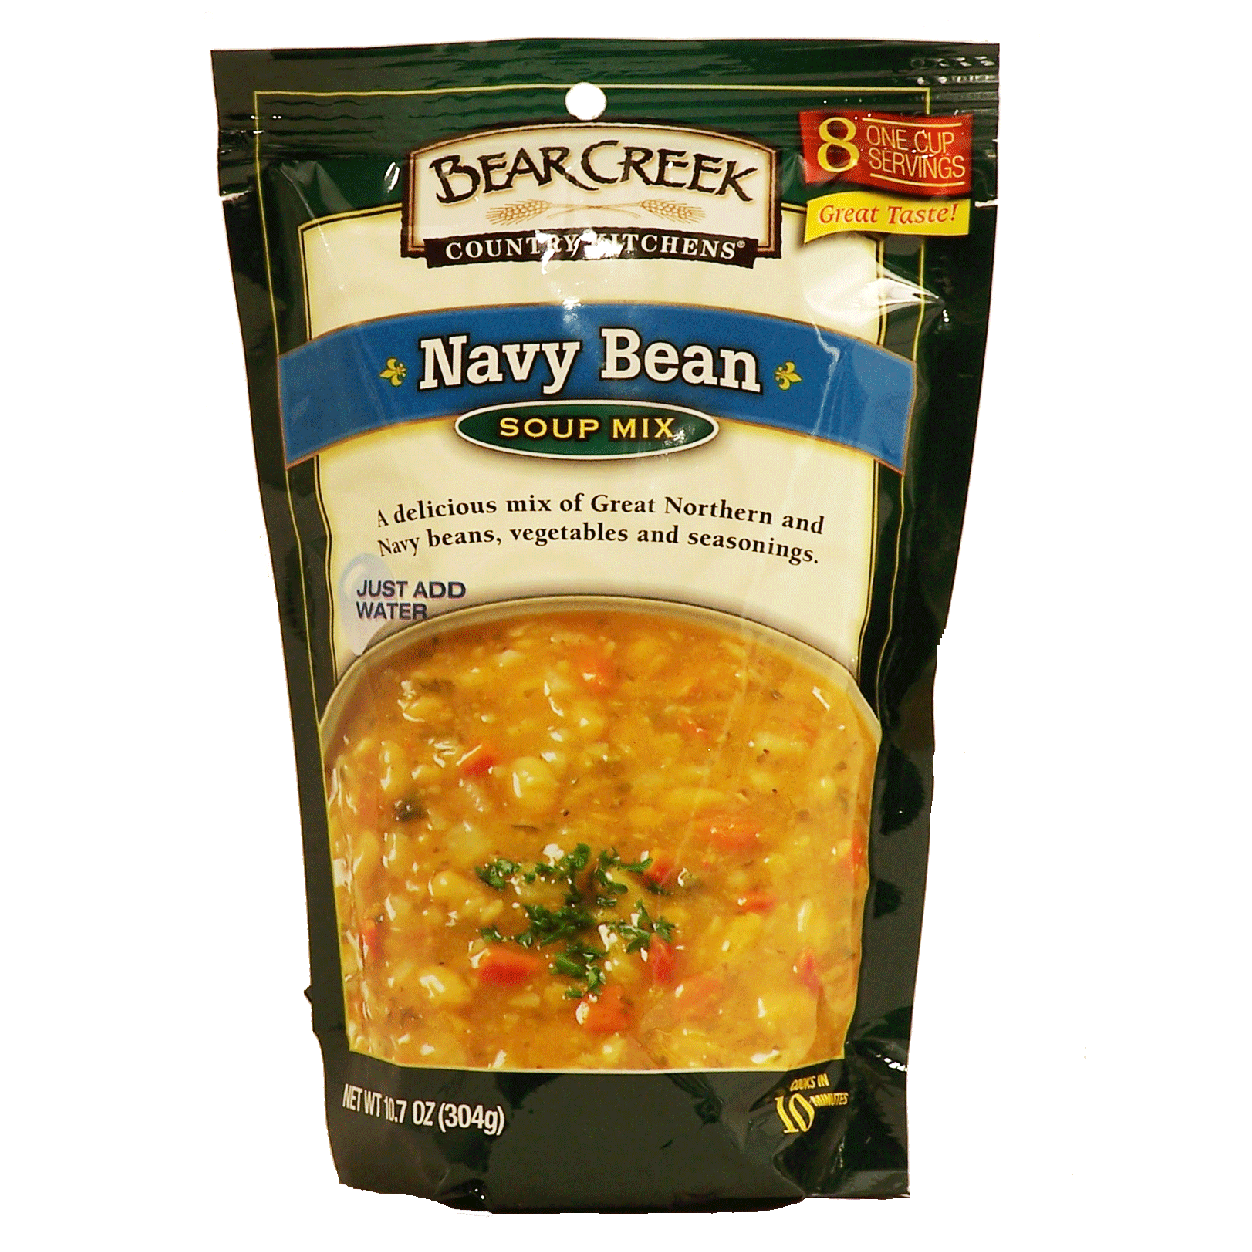 Bear Creek Country Kitchens navy bean soup mix, just add water 10.7oz